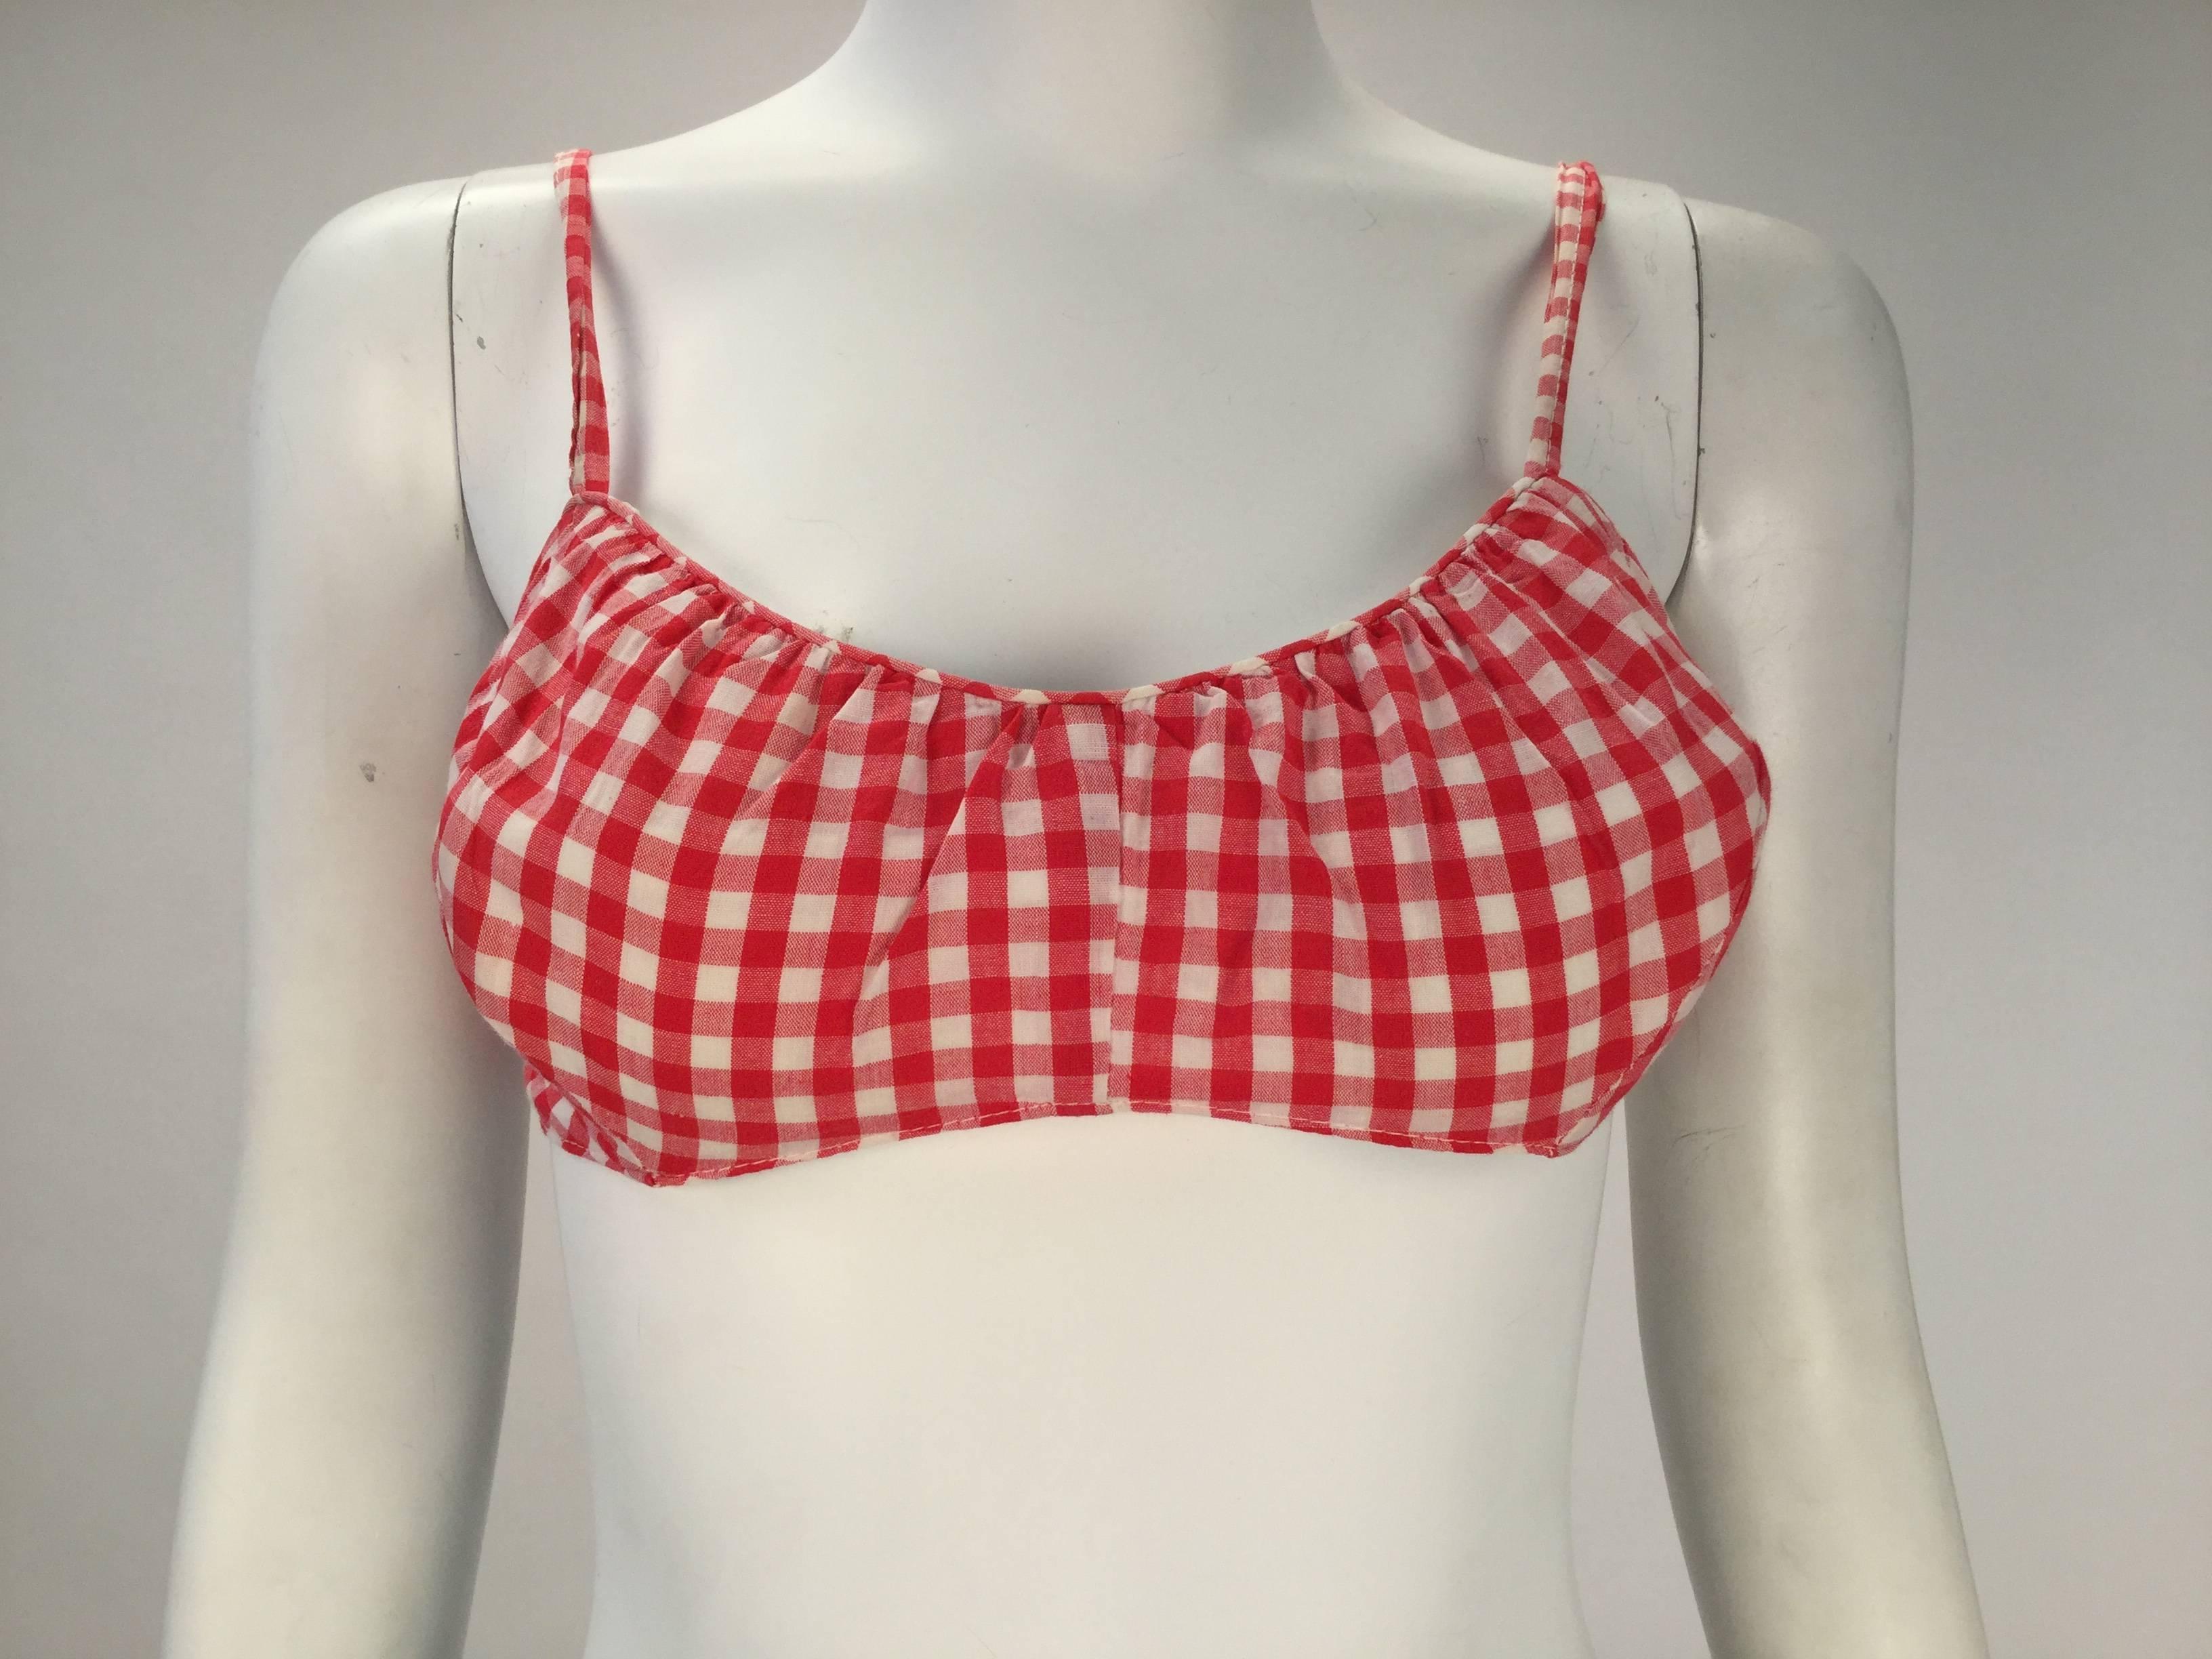 
Chic 1960's Cole of California white and red checkered print bikini with matching headband. The top has thin straps and a side two button closure. It is also lined, and includes bust support. The bikini bottom is also lined and has an elastic